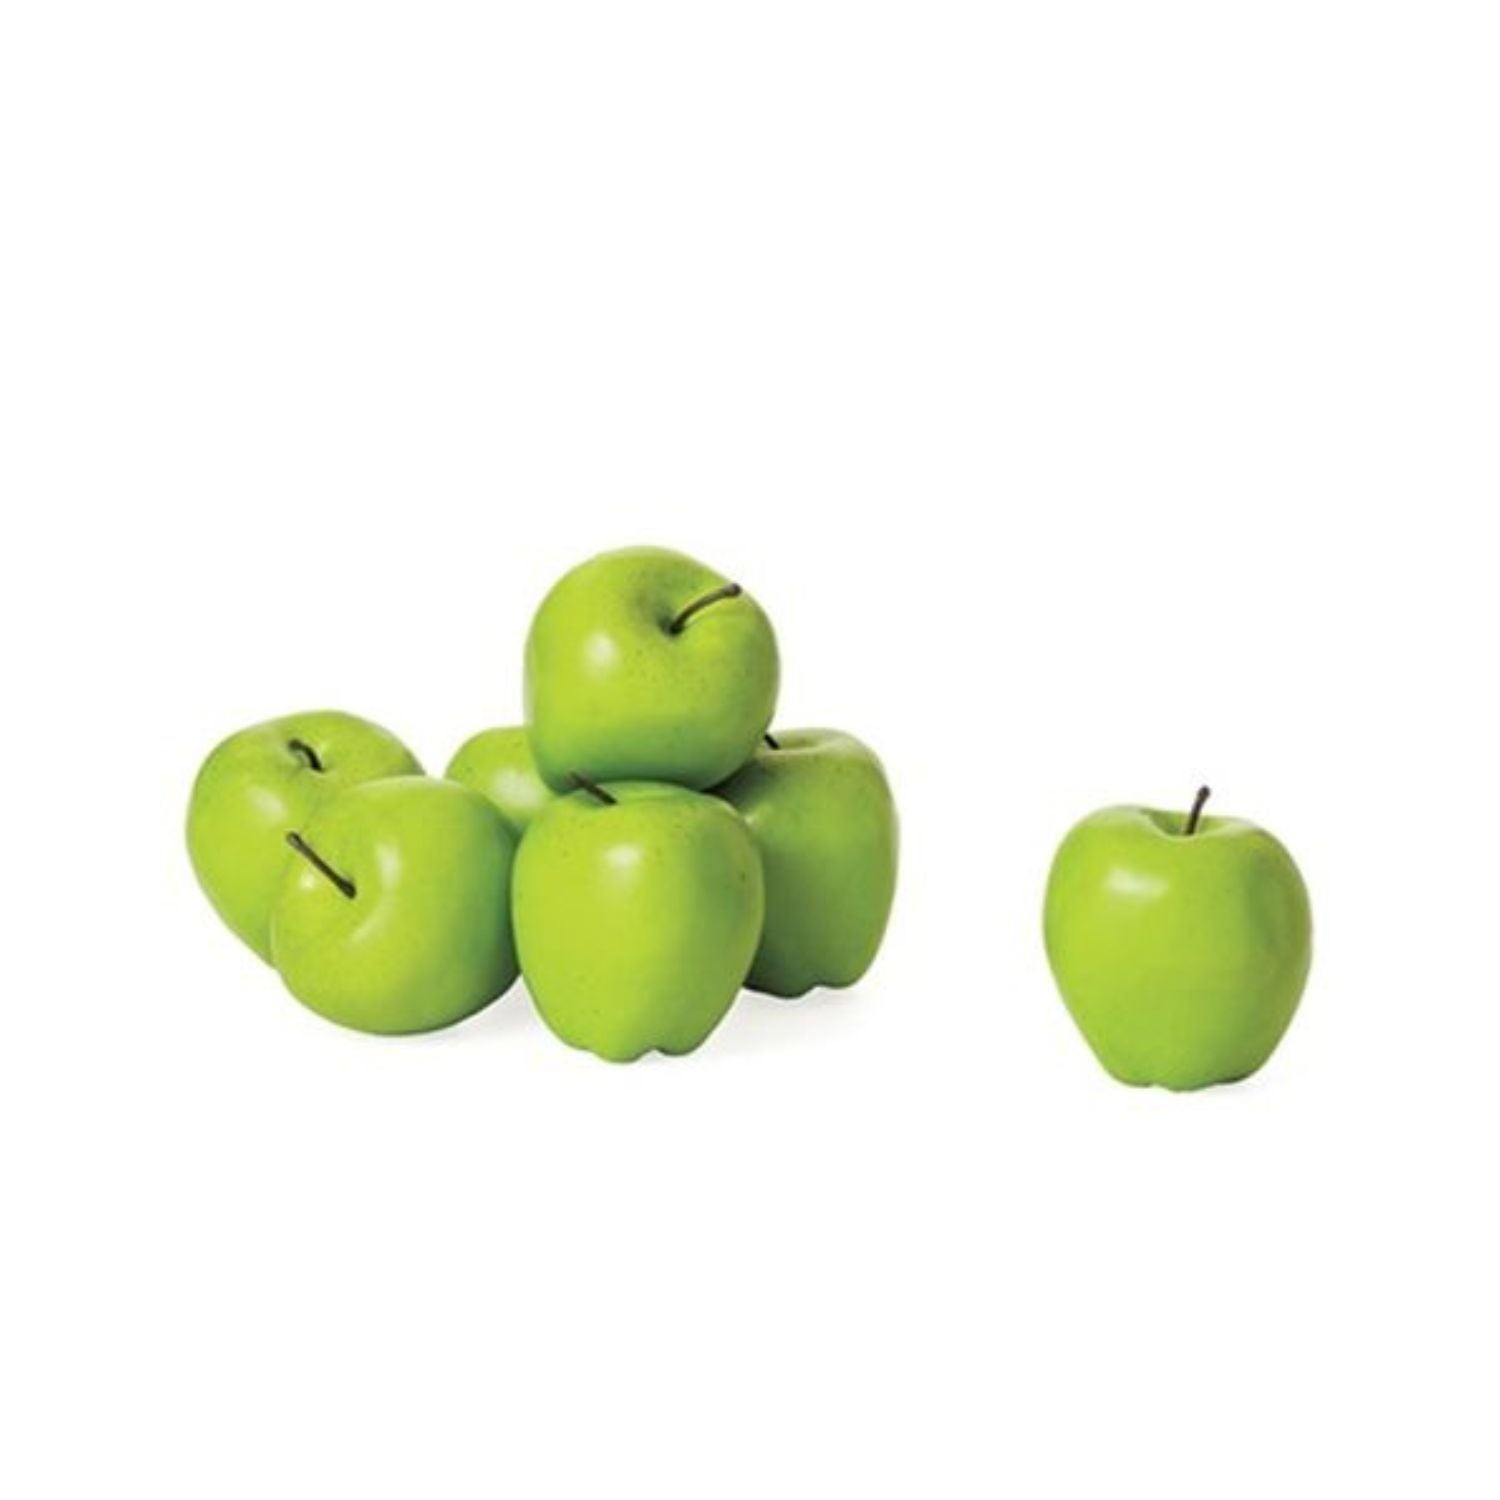 Torre & Tagus Orchard Faux Fruit Dcor, Set of 8 - Apples, Green, 3.5 x 2.5